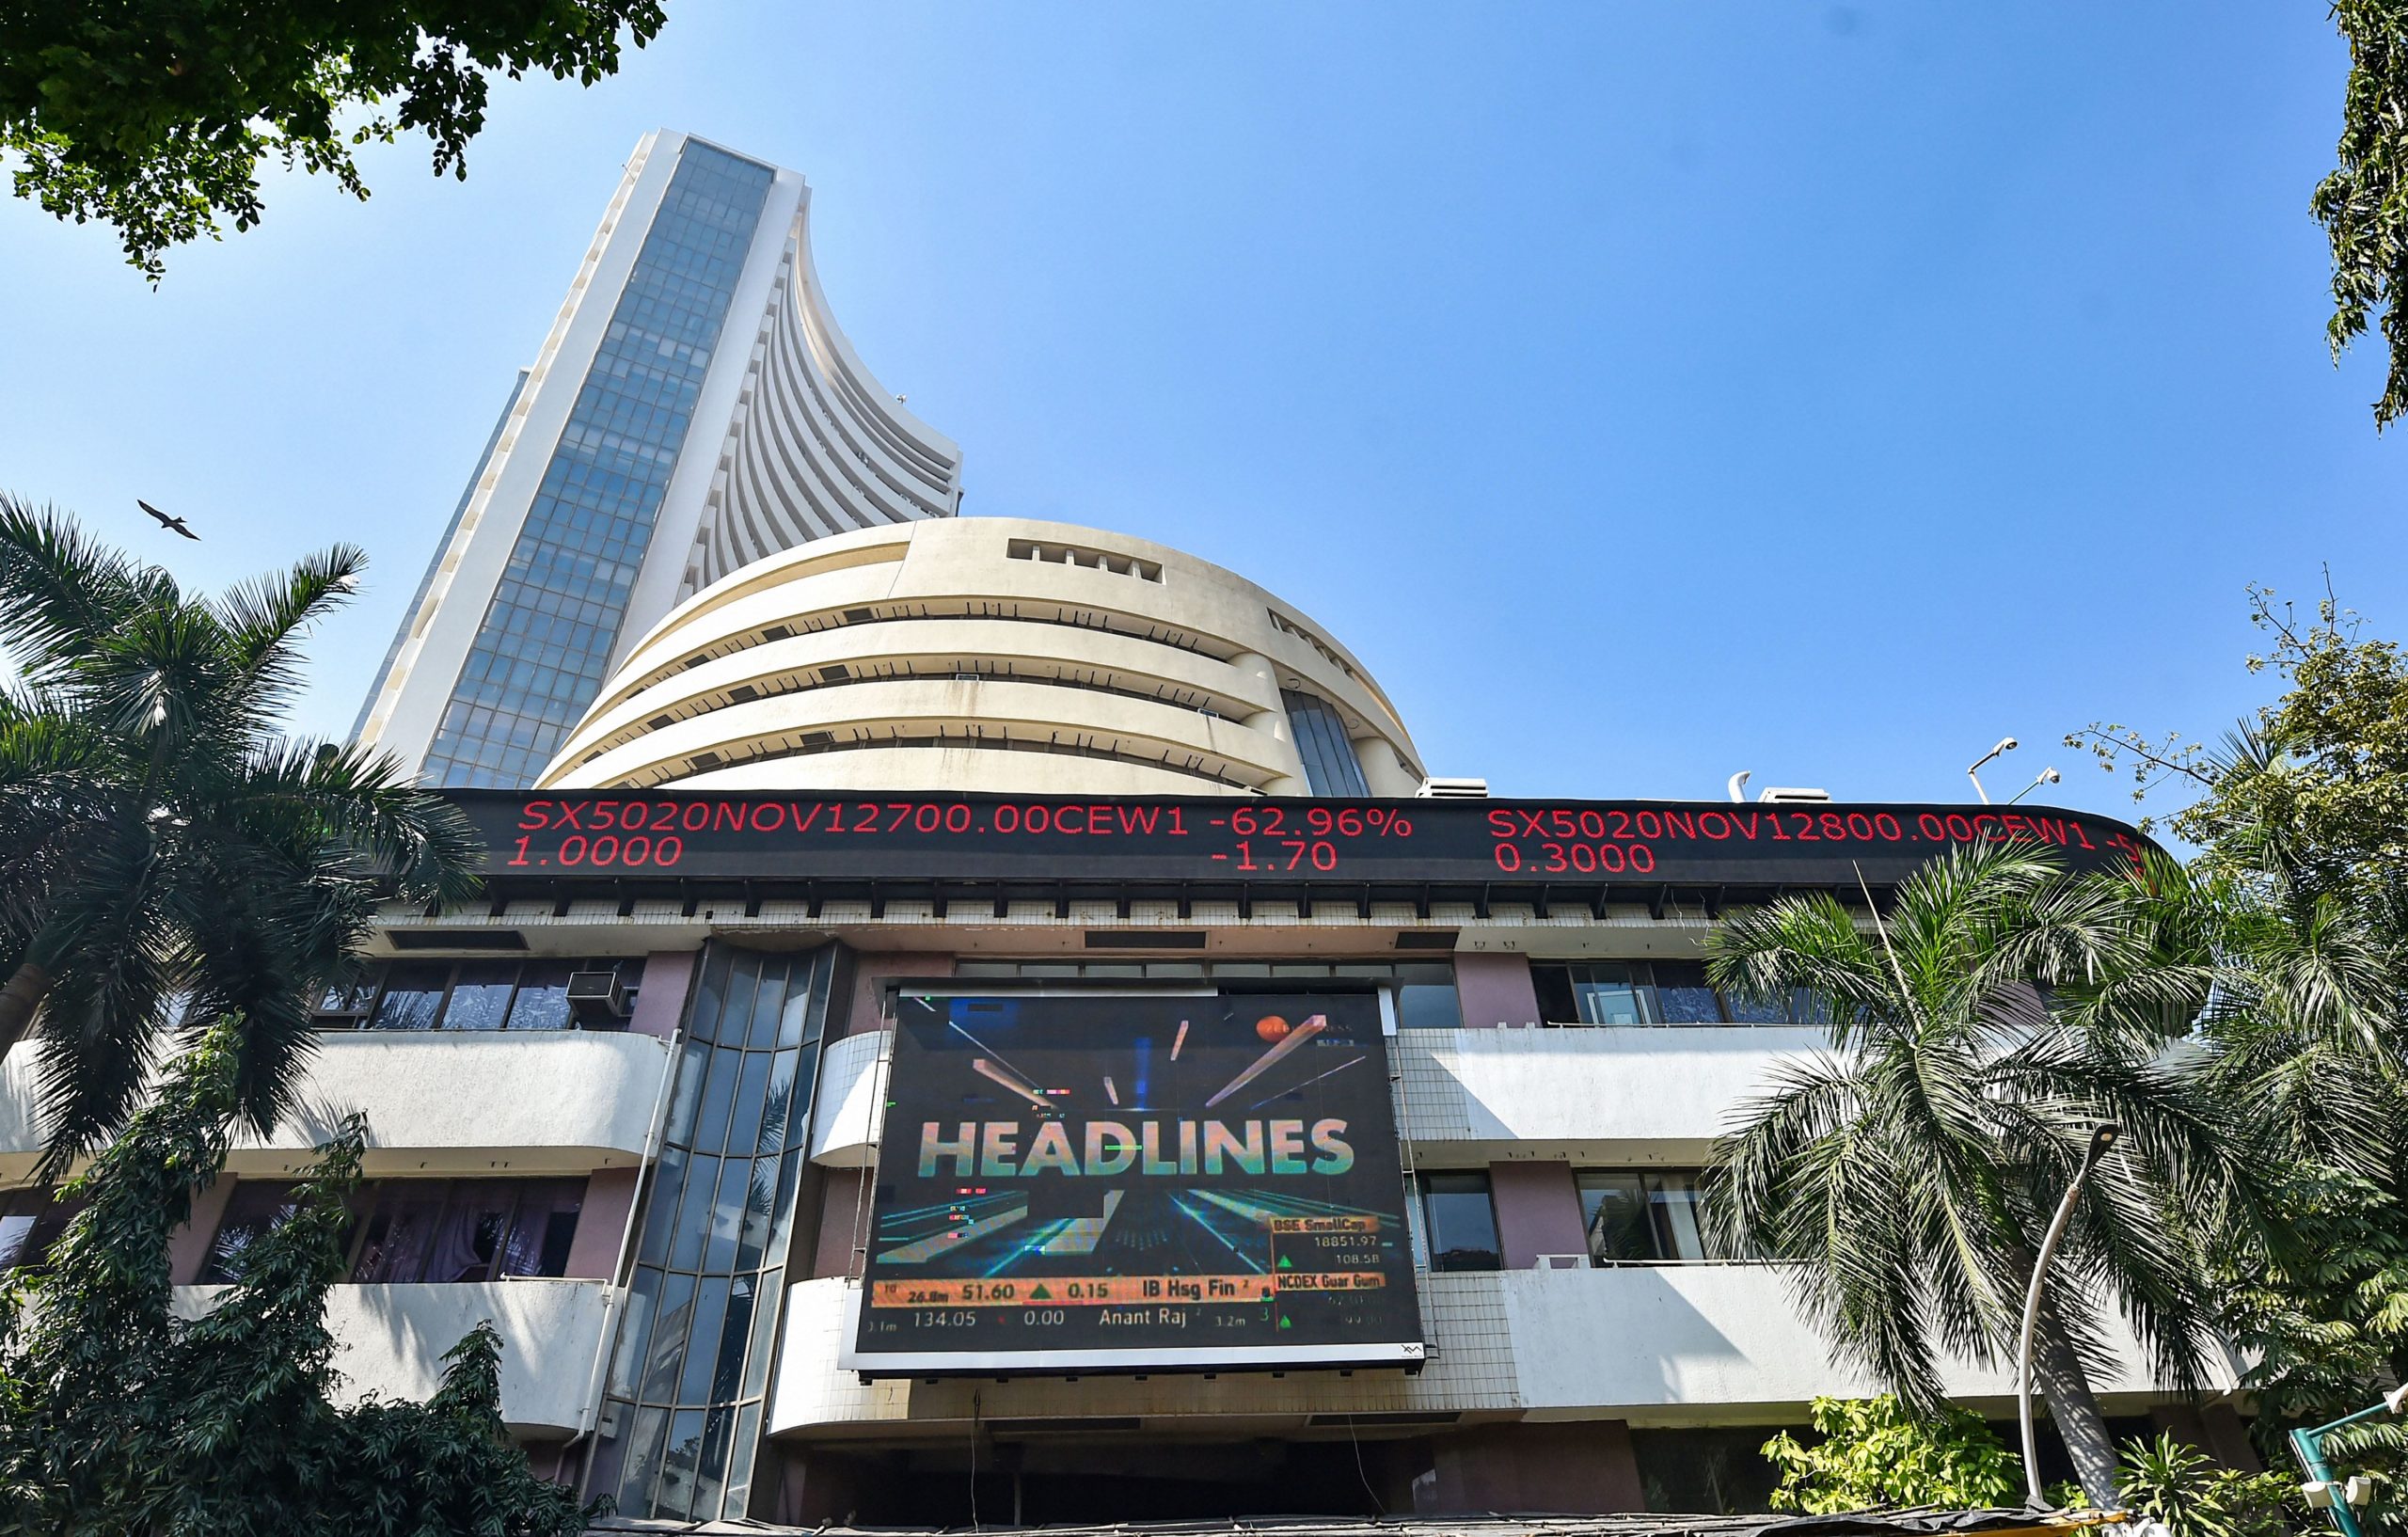 Trending Stocks: Adani Entp, Hero MotoCorp, Infosys and others in news today